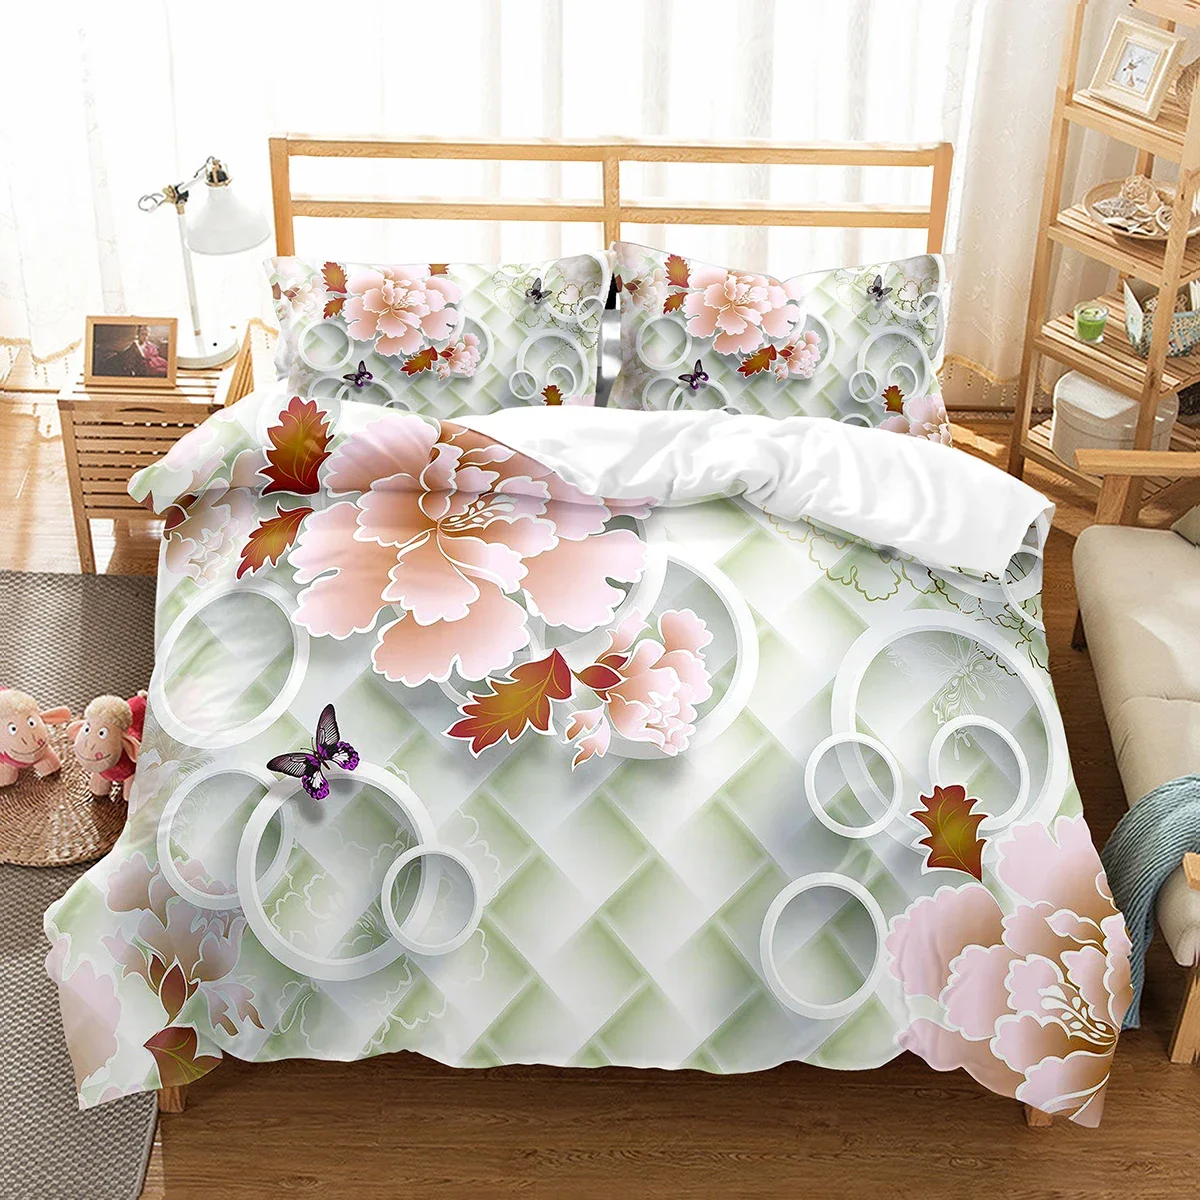 

Geometric Duvet Cover Single Twin King Queen Size Floral Bedding Set Microfiber Circle Comforter Cover For Girl Teen Adult Room